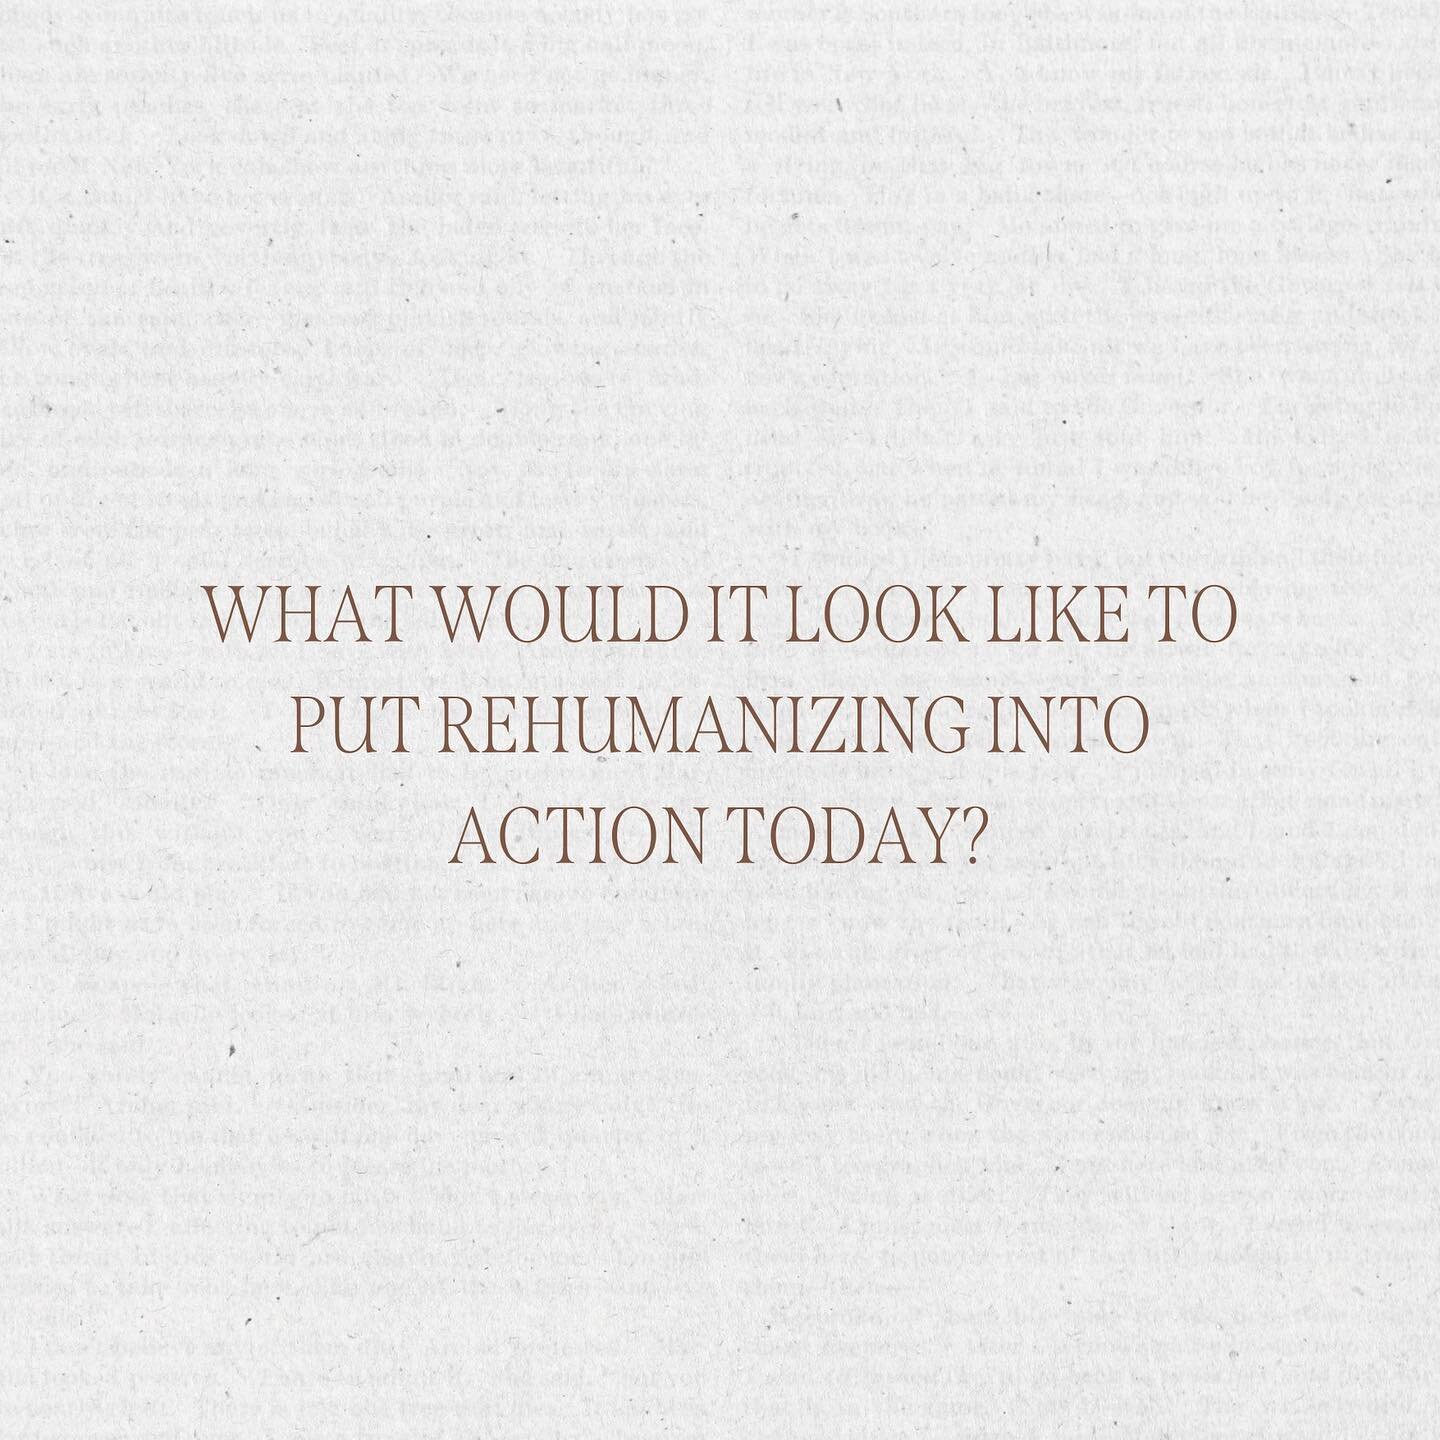 The invitation to rehumanize is one that is constantly on my mind and is particularly pressing right now. To me, this is a needed and life-saving conversation. Will you join me?

↟ What if we took the opportunity to rehumanize?

↟ What would that loo